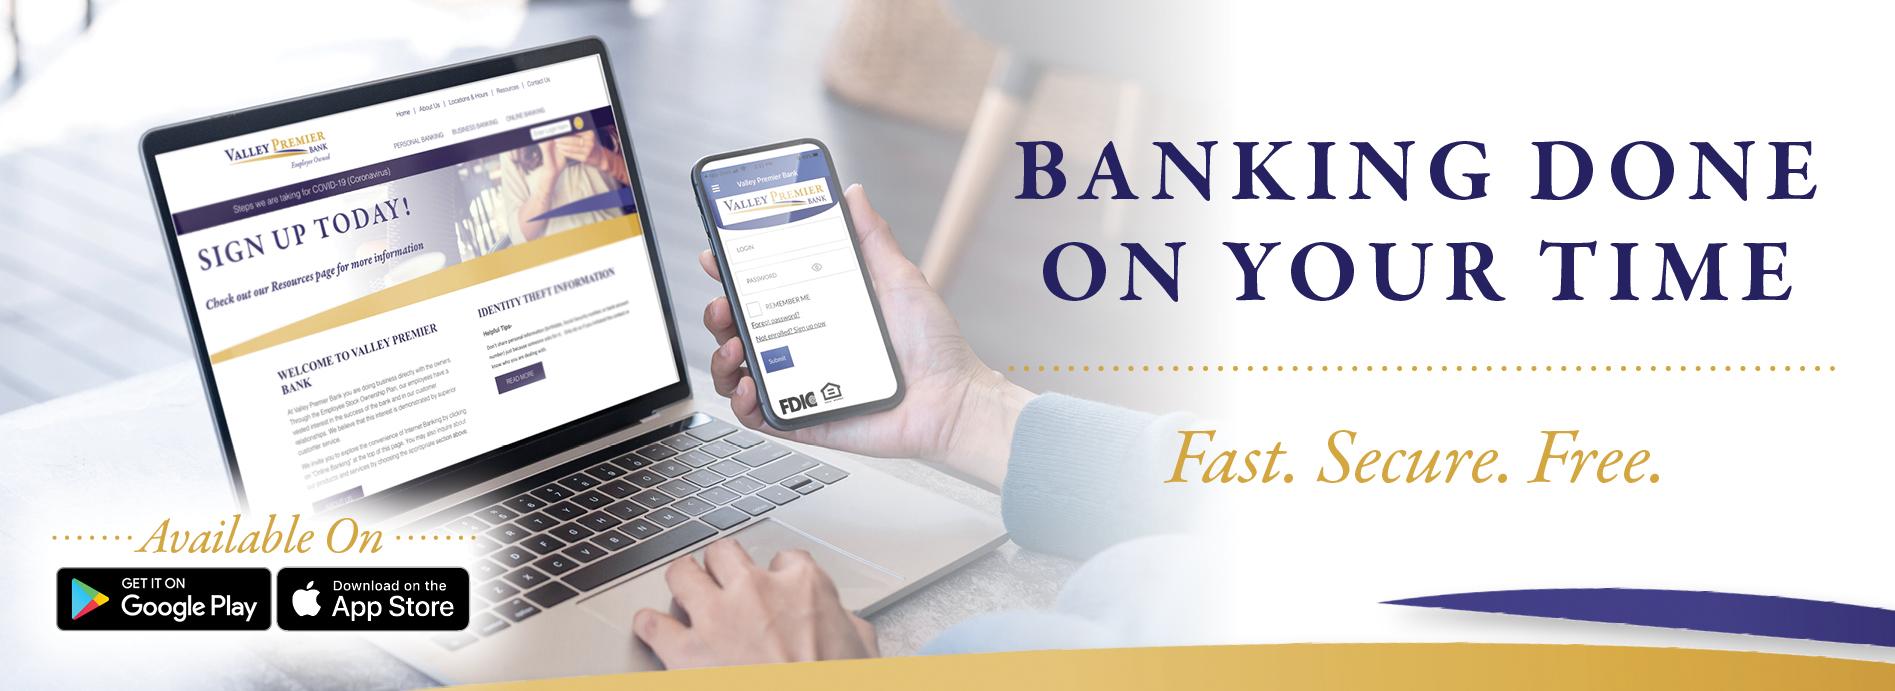 Banking Done on Your Time.  Fast. Secure. Free.  Available on Google Play or the App Store.  Image of a laptop and cell phone displaying Valley Premier Bank website and app..